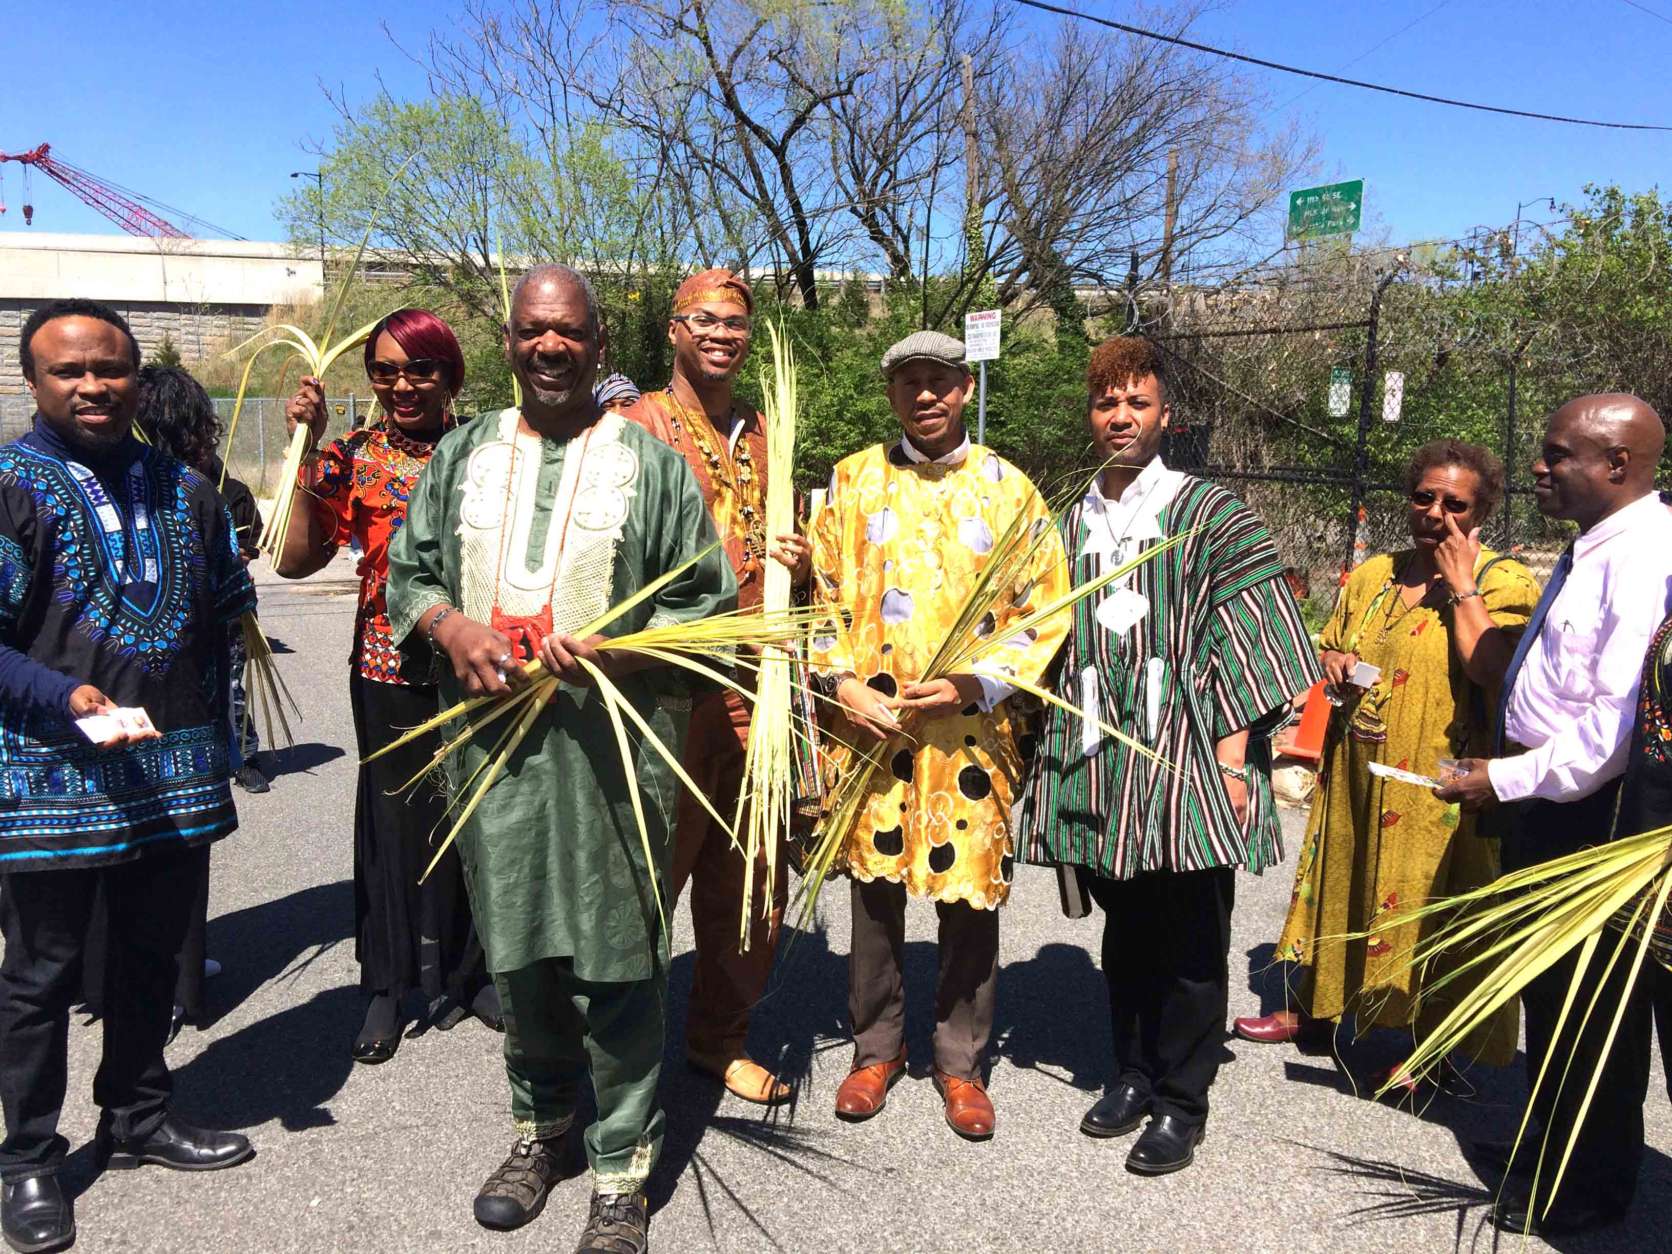 Bishop Rainey Cheeks of Inner Light Ministries Church of Southeast D.C. and some of his congregants handed out palm fronds to commemorate Palm Sunday during the third annual Anacostia River Festival on Sunday. (WTOP/Dick Uliano)